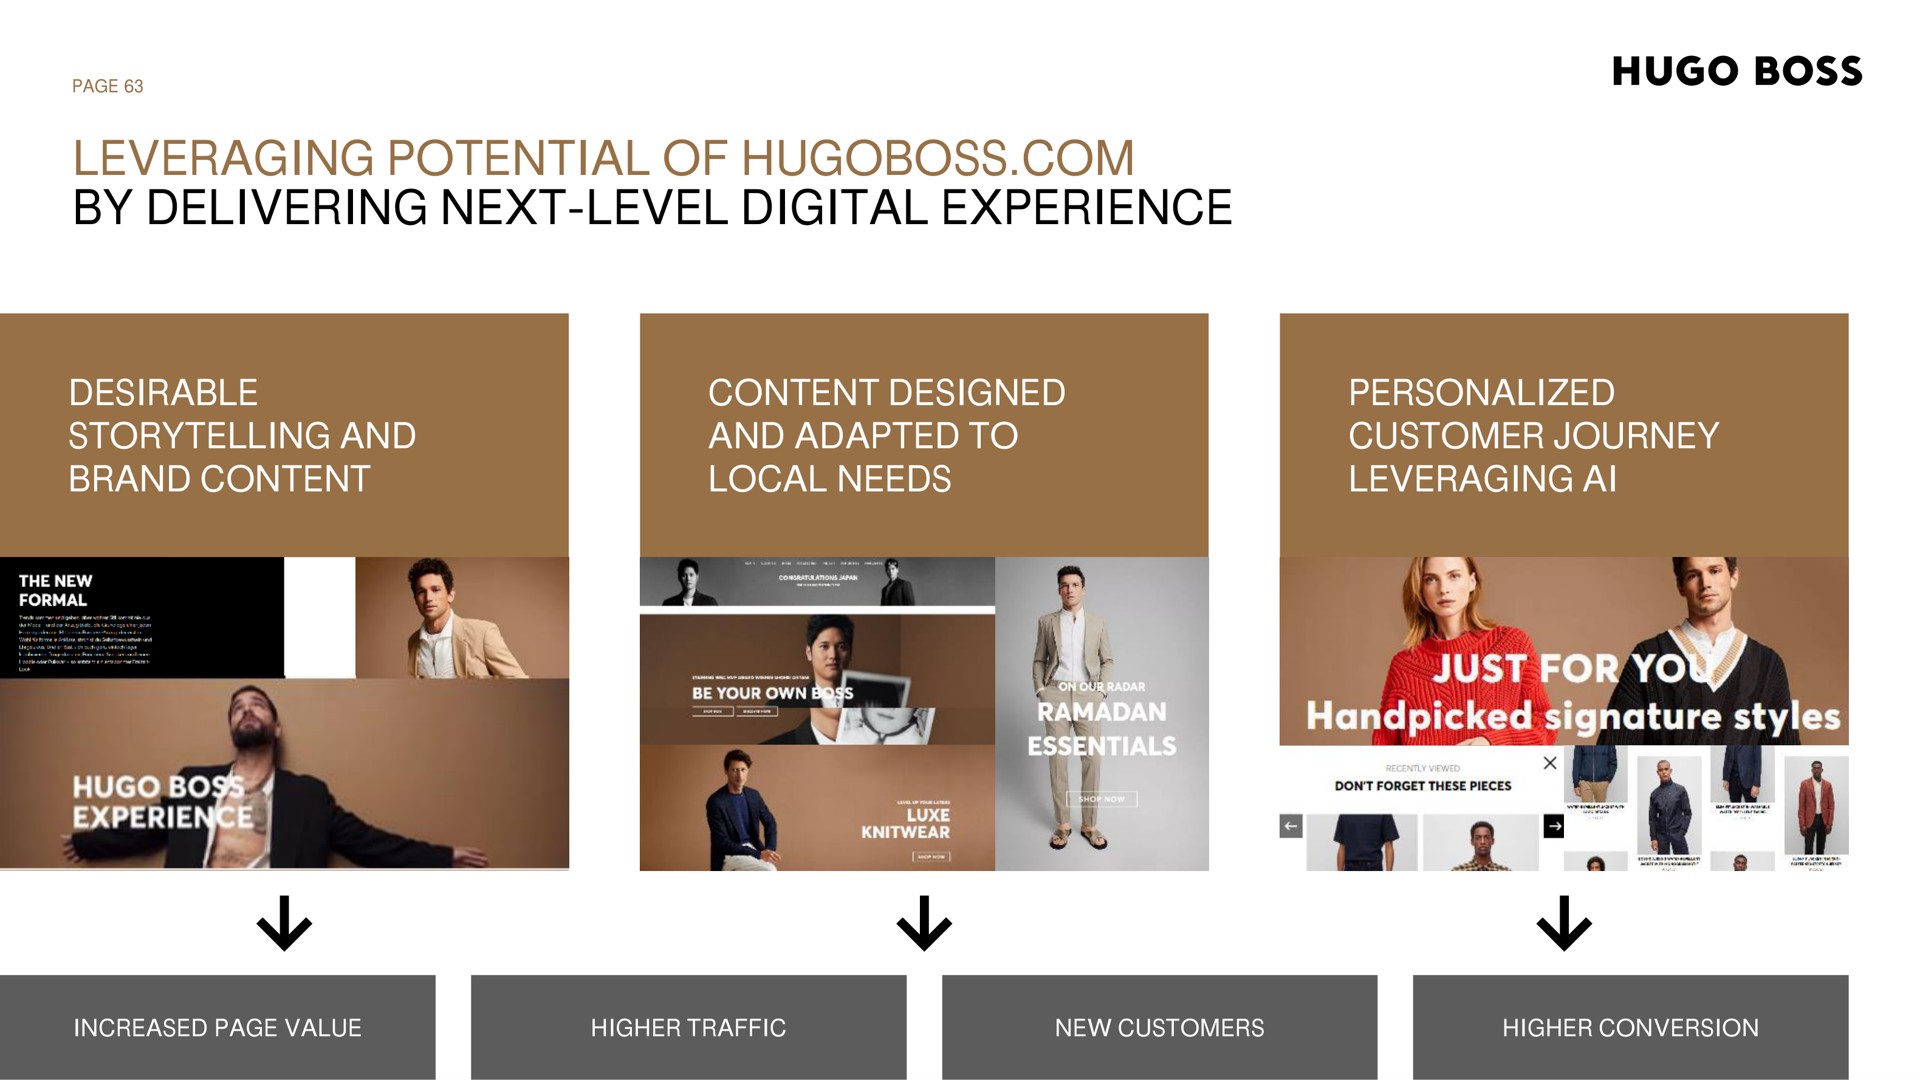 leveraging potential of by delivering next level digital experience boss desirable storytelling and brand content content designed and adapted to local needs personalized customer journey just for a signature styles | Hugo Boss